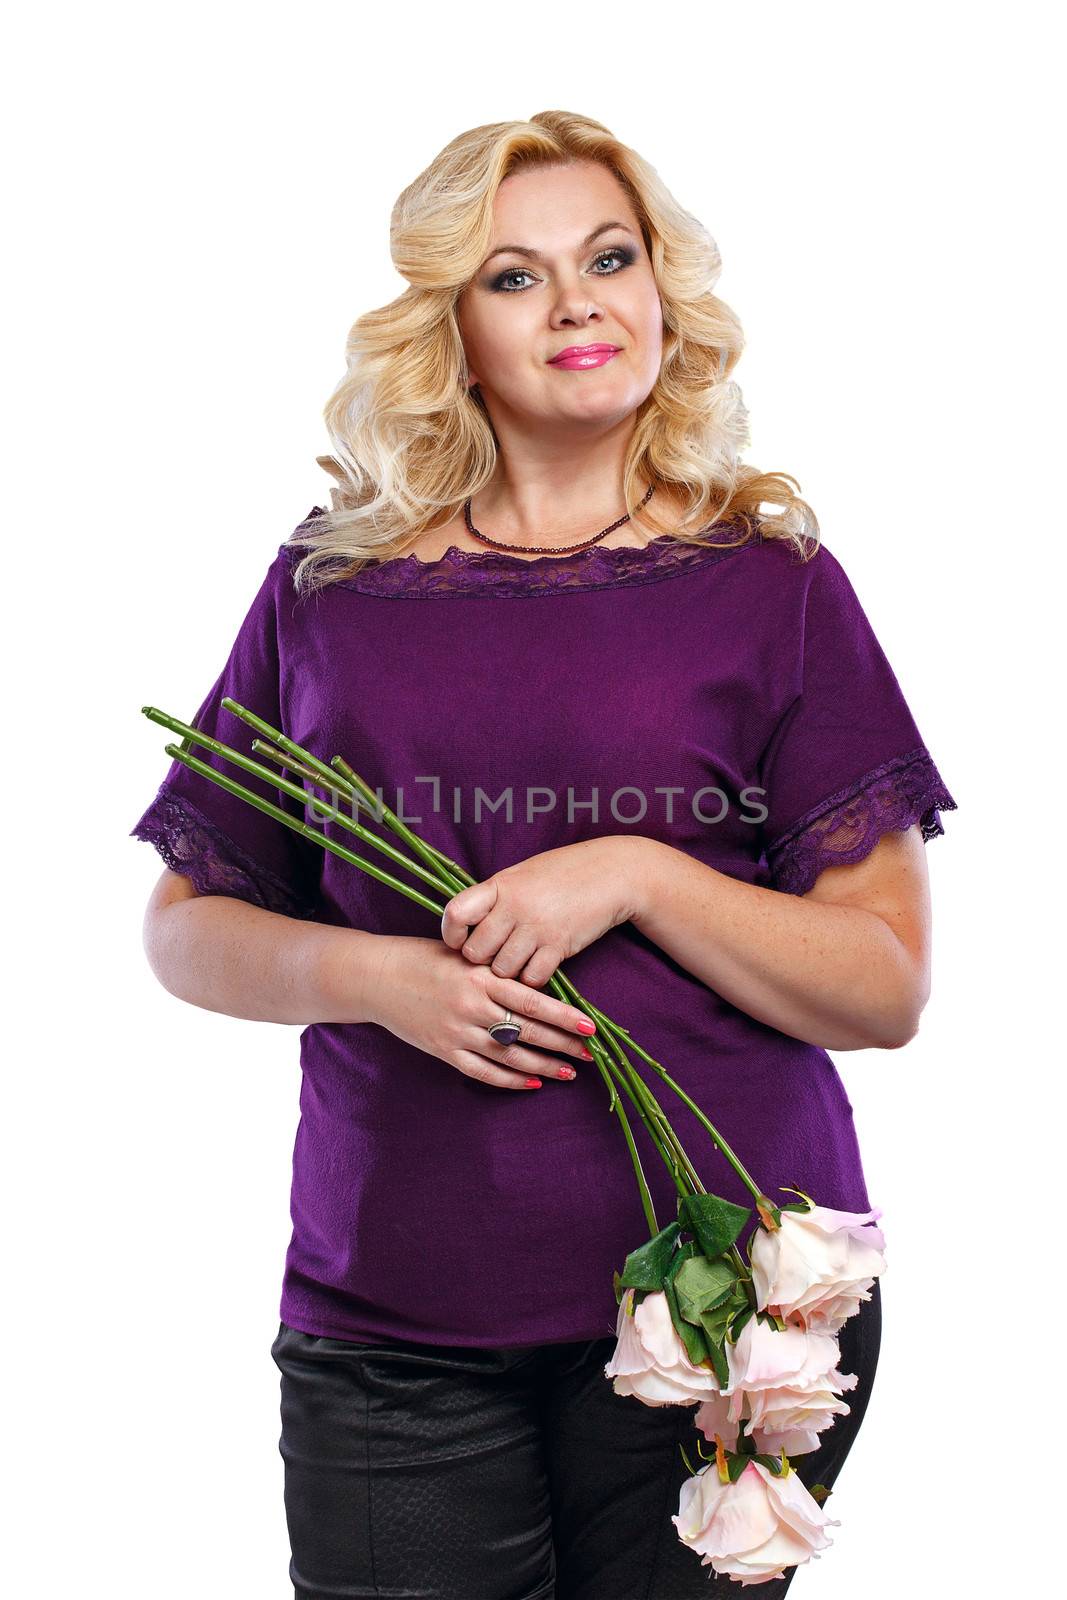 Blonde lady with a bouquet of flowers in her blouse shot in studio